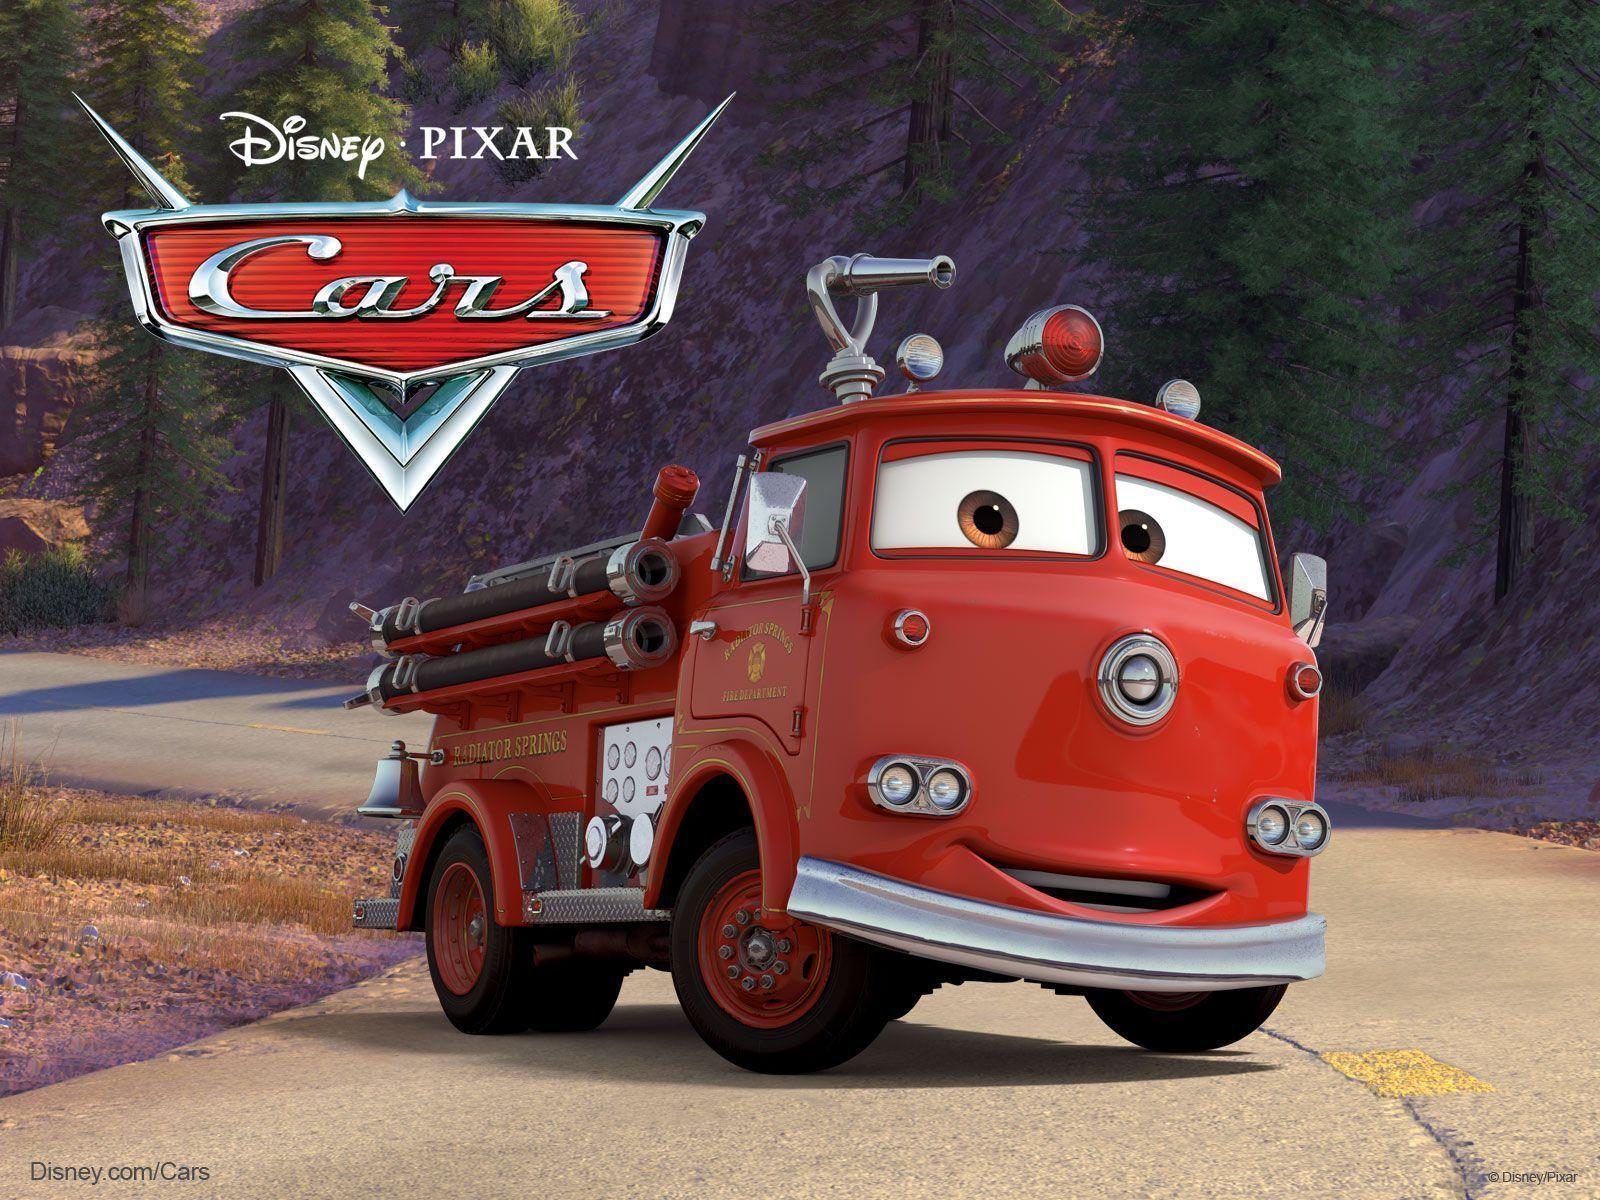 Red the Fire Engine from Pixar Cars Movie Desktop Wallpaper